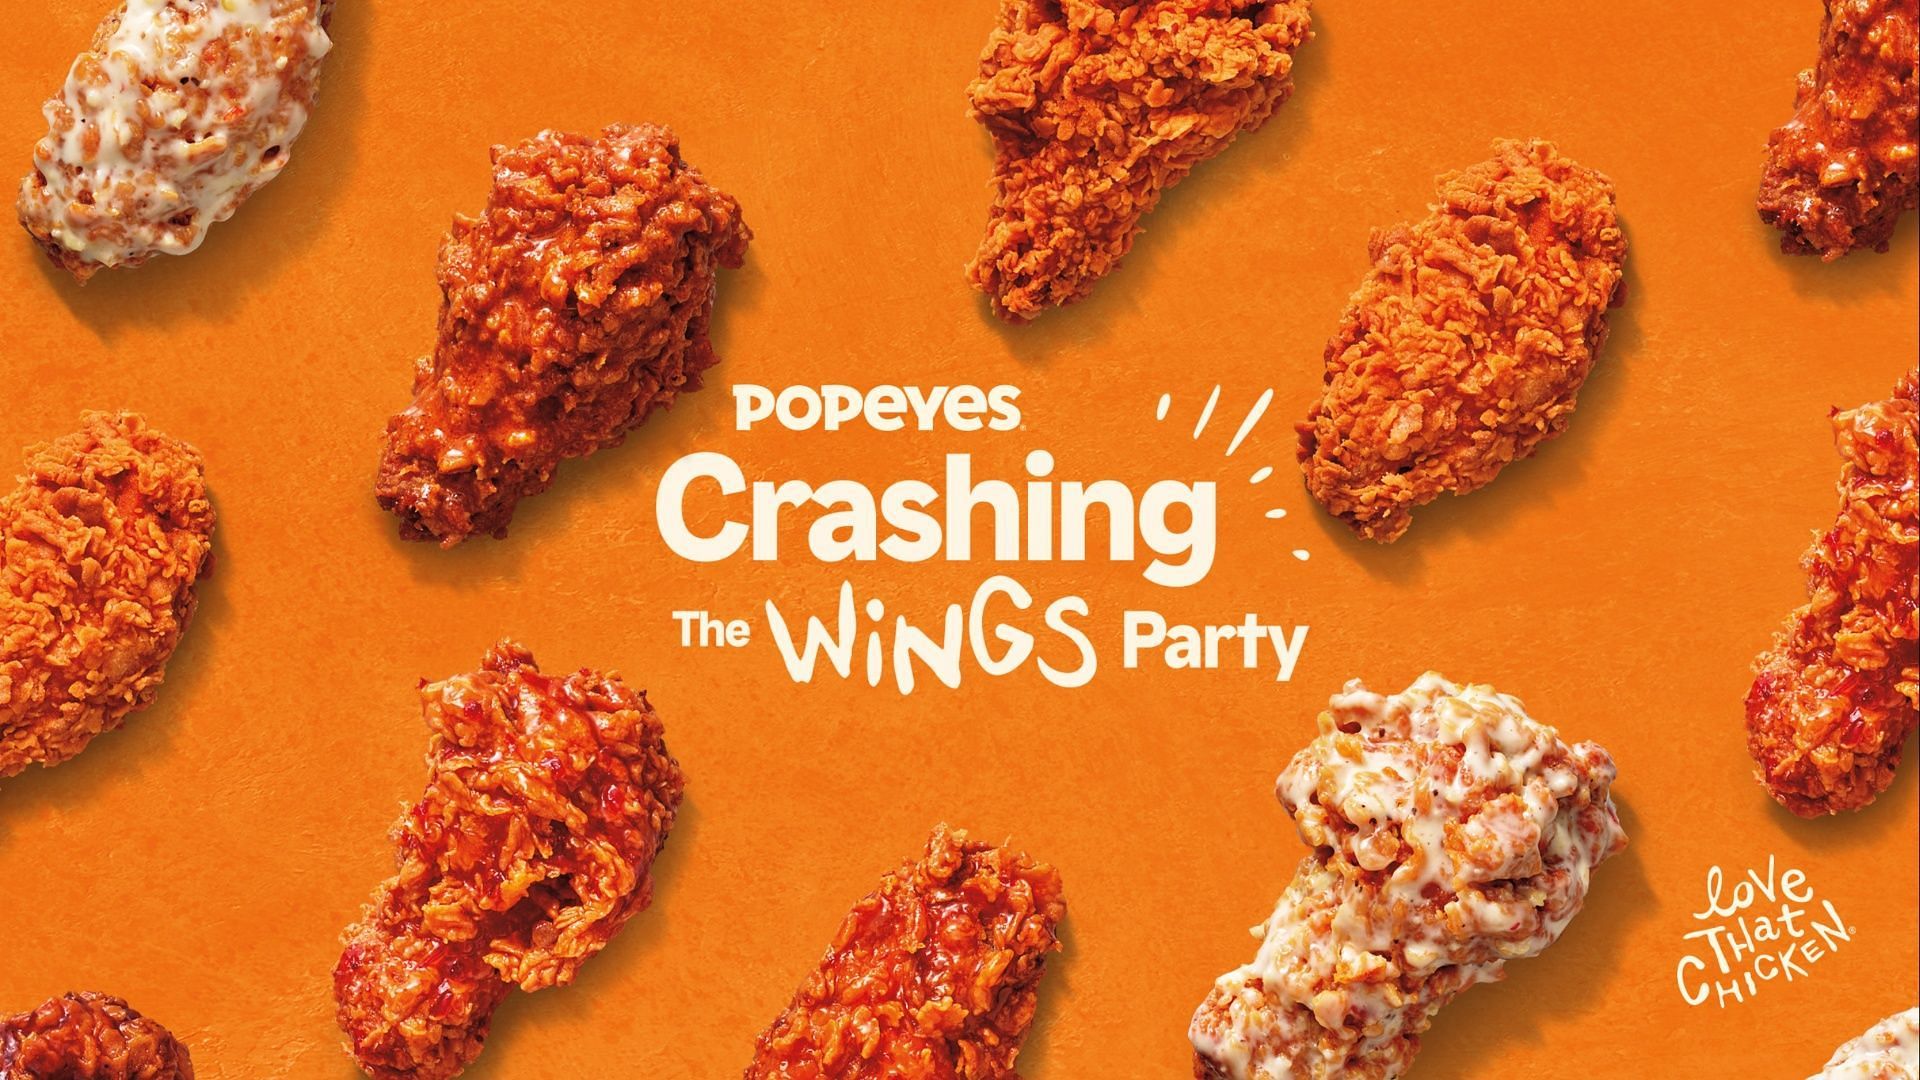 The juicy Chicken Wings can be enjoyed at $5.99 for six pieces (Image via Popeyes)